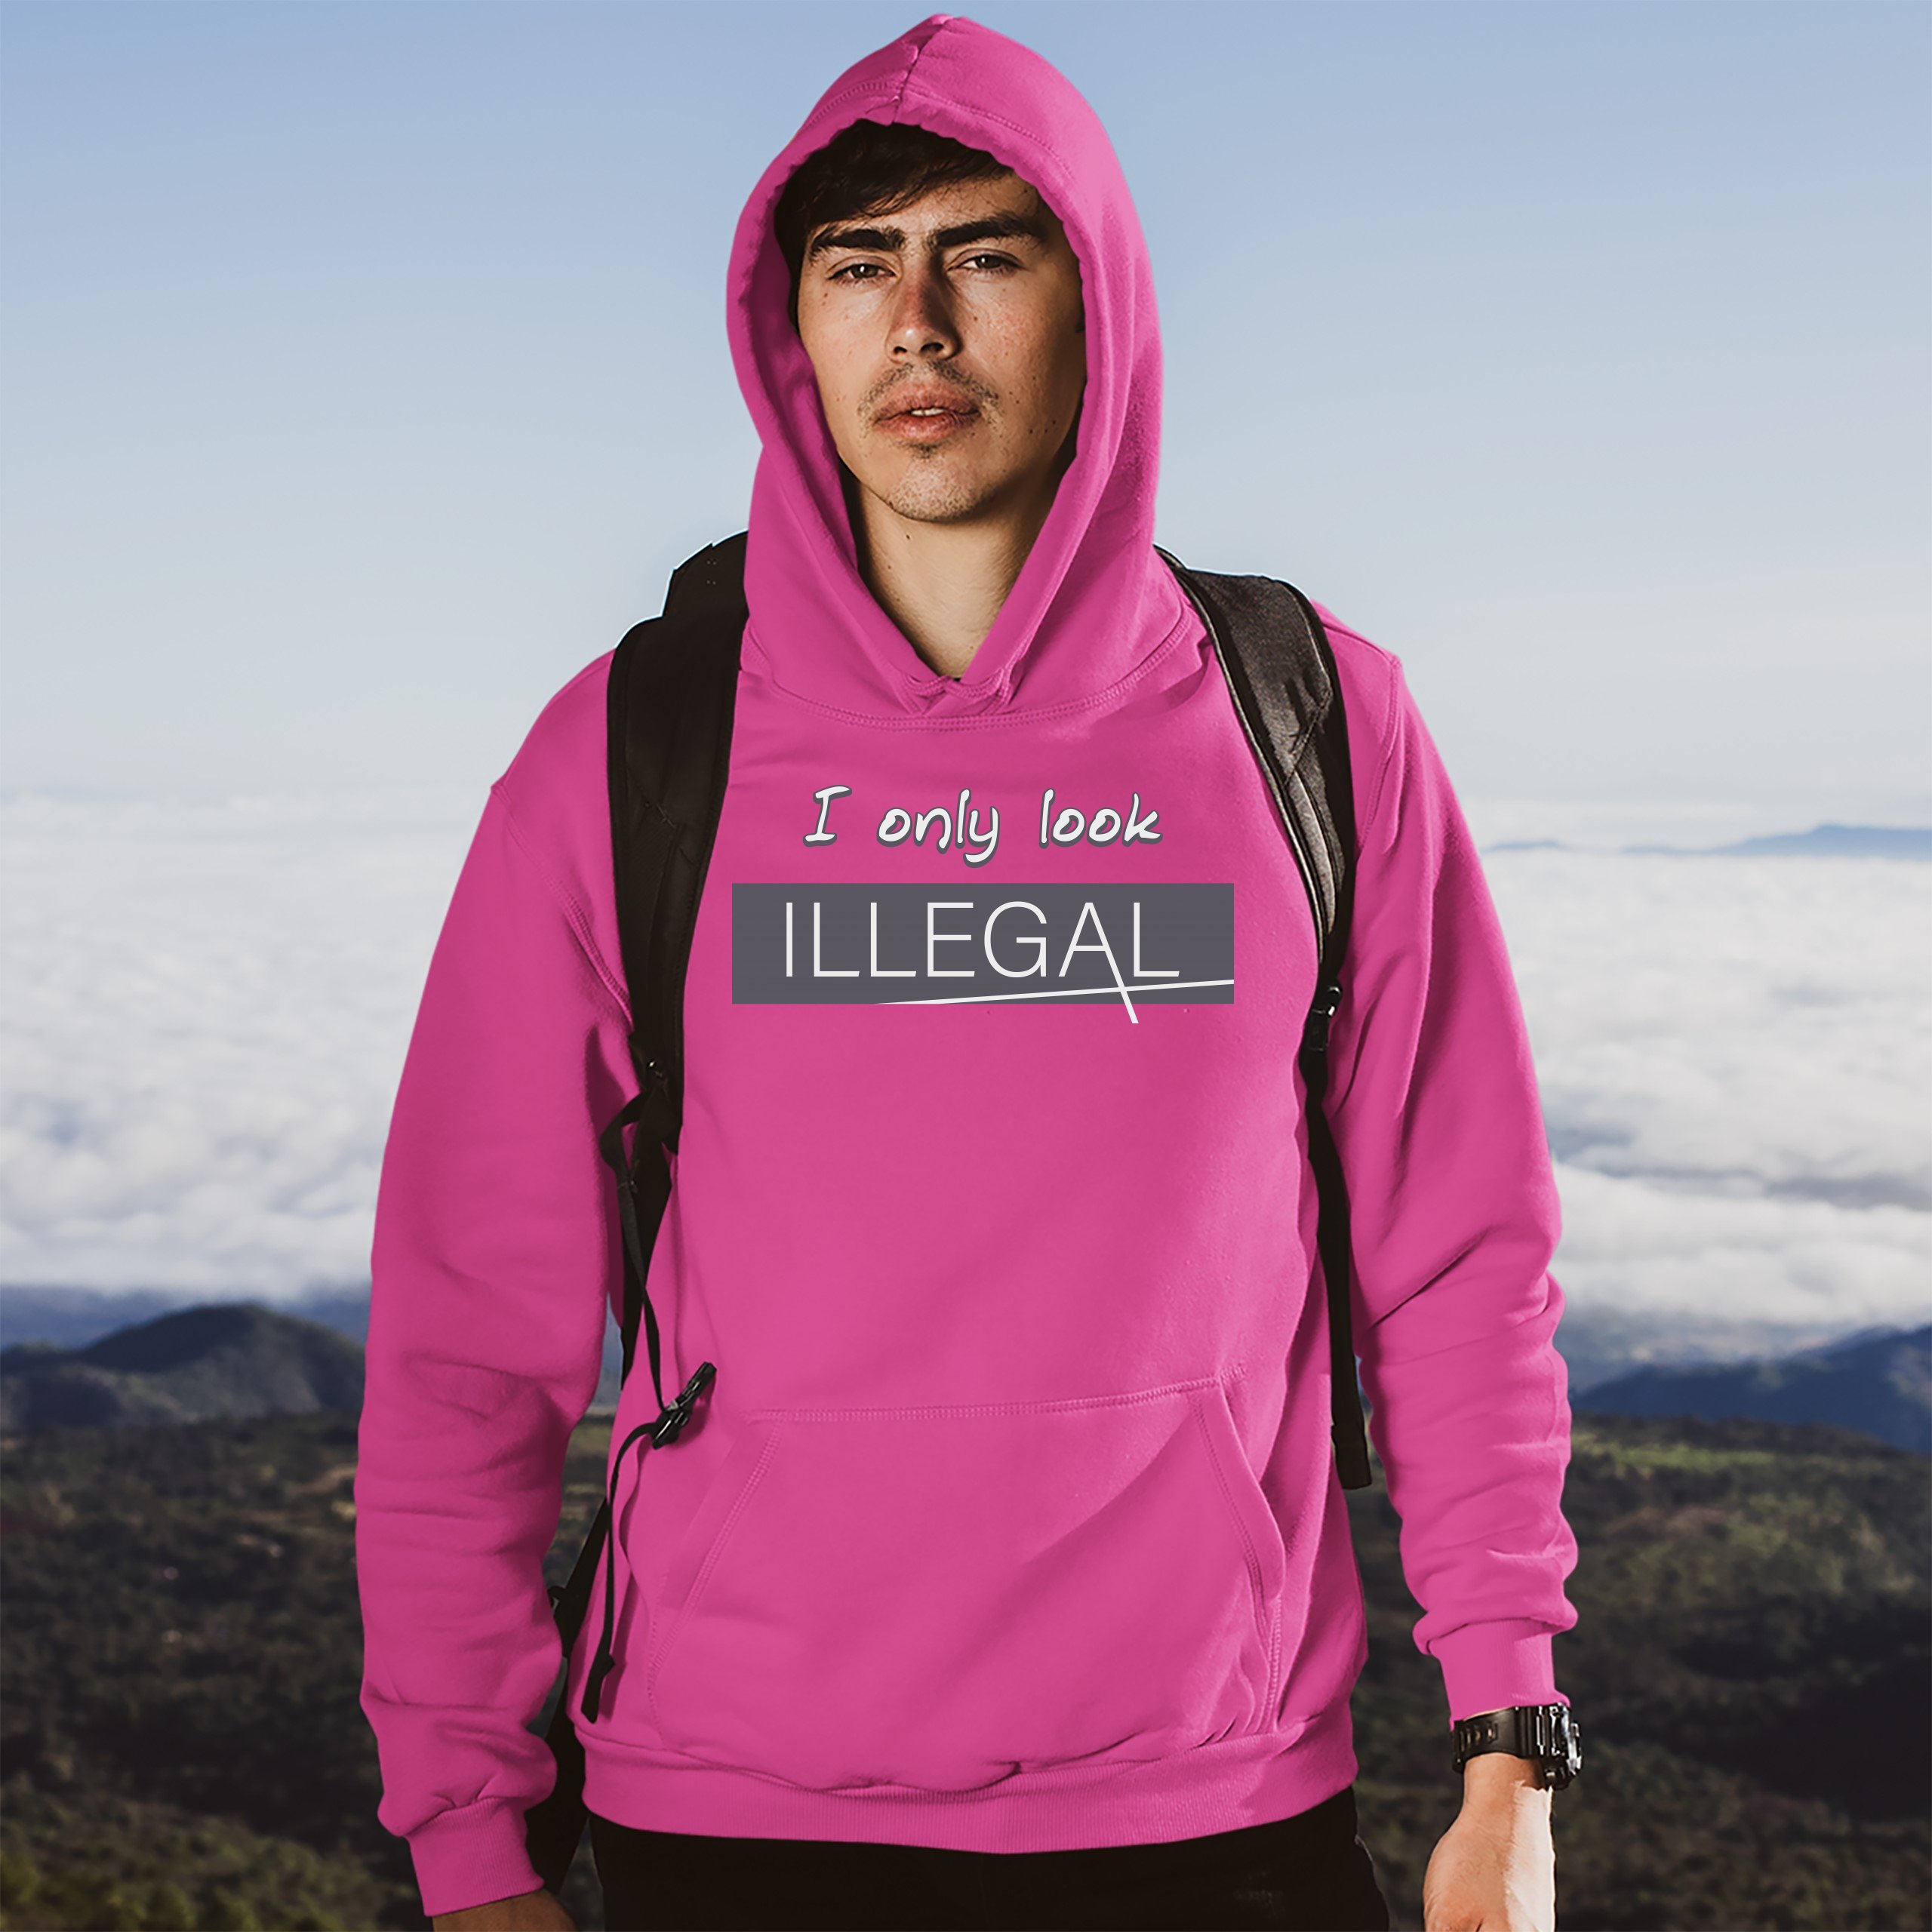 I Only Look Illegal Sweatshirt Stop Racism Pro Immigration Funny Hoodie